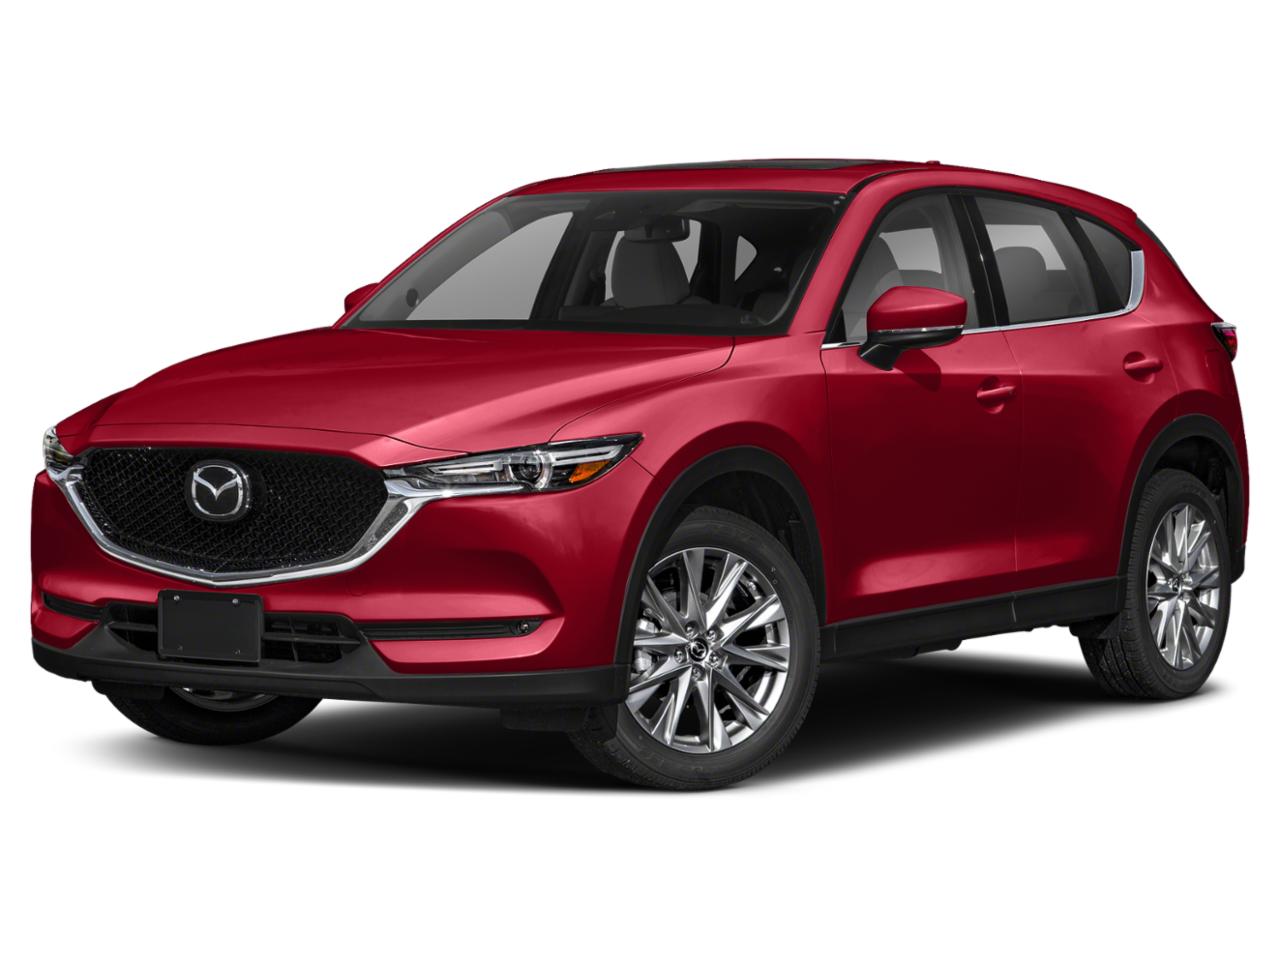 New 2020 Mazda CX-5 Grand Touring AWD in Soul Red Crystal ...